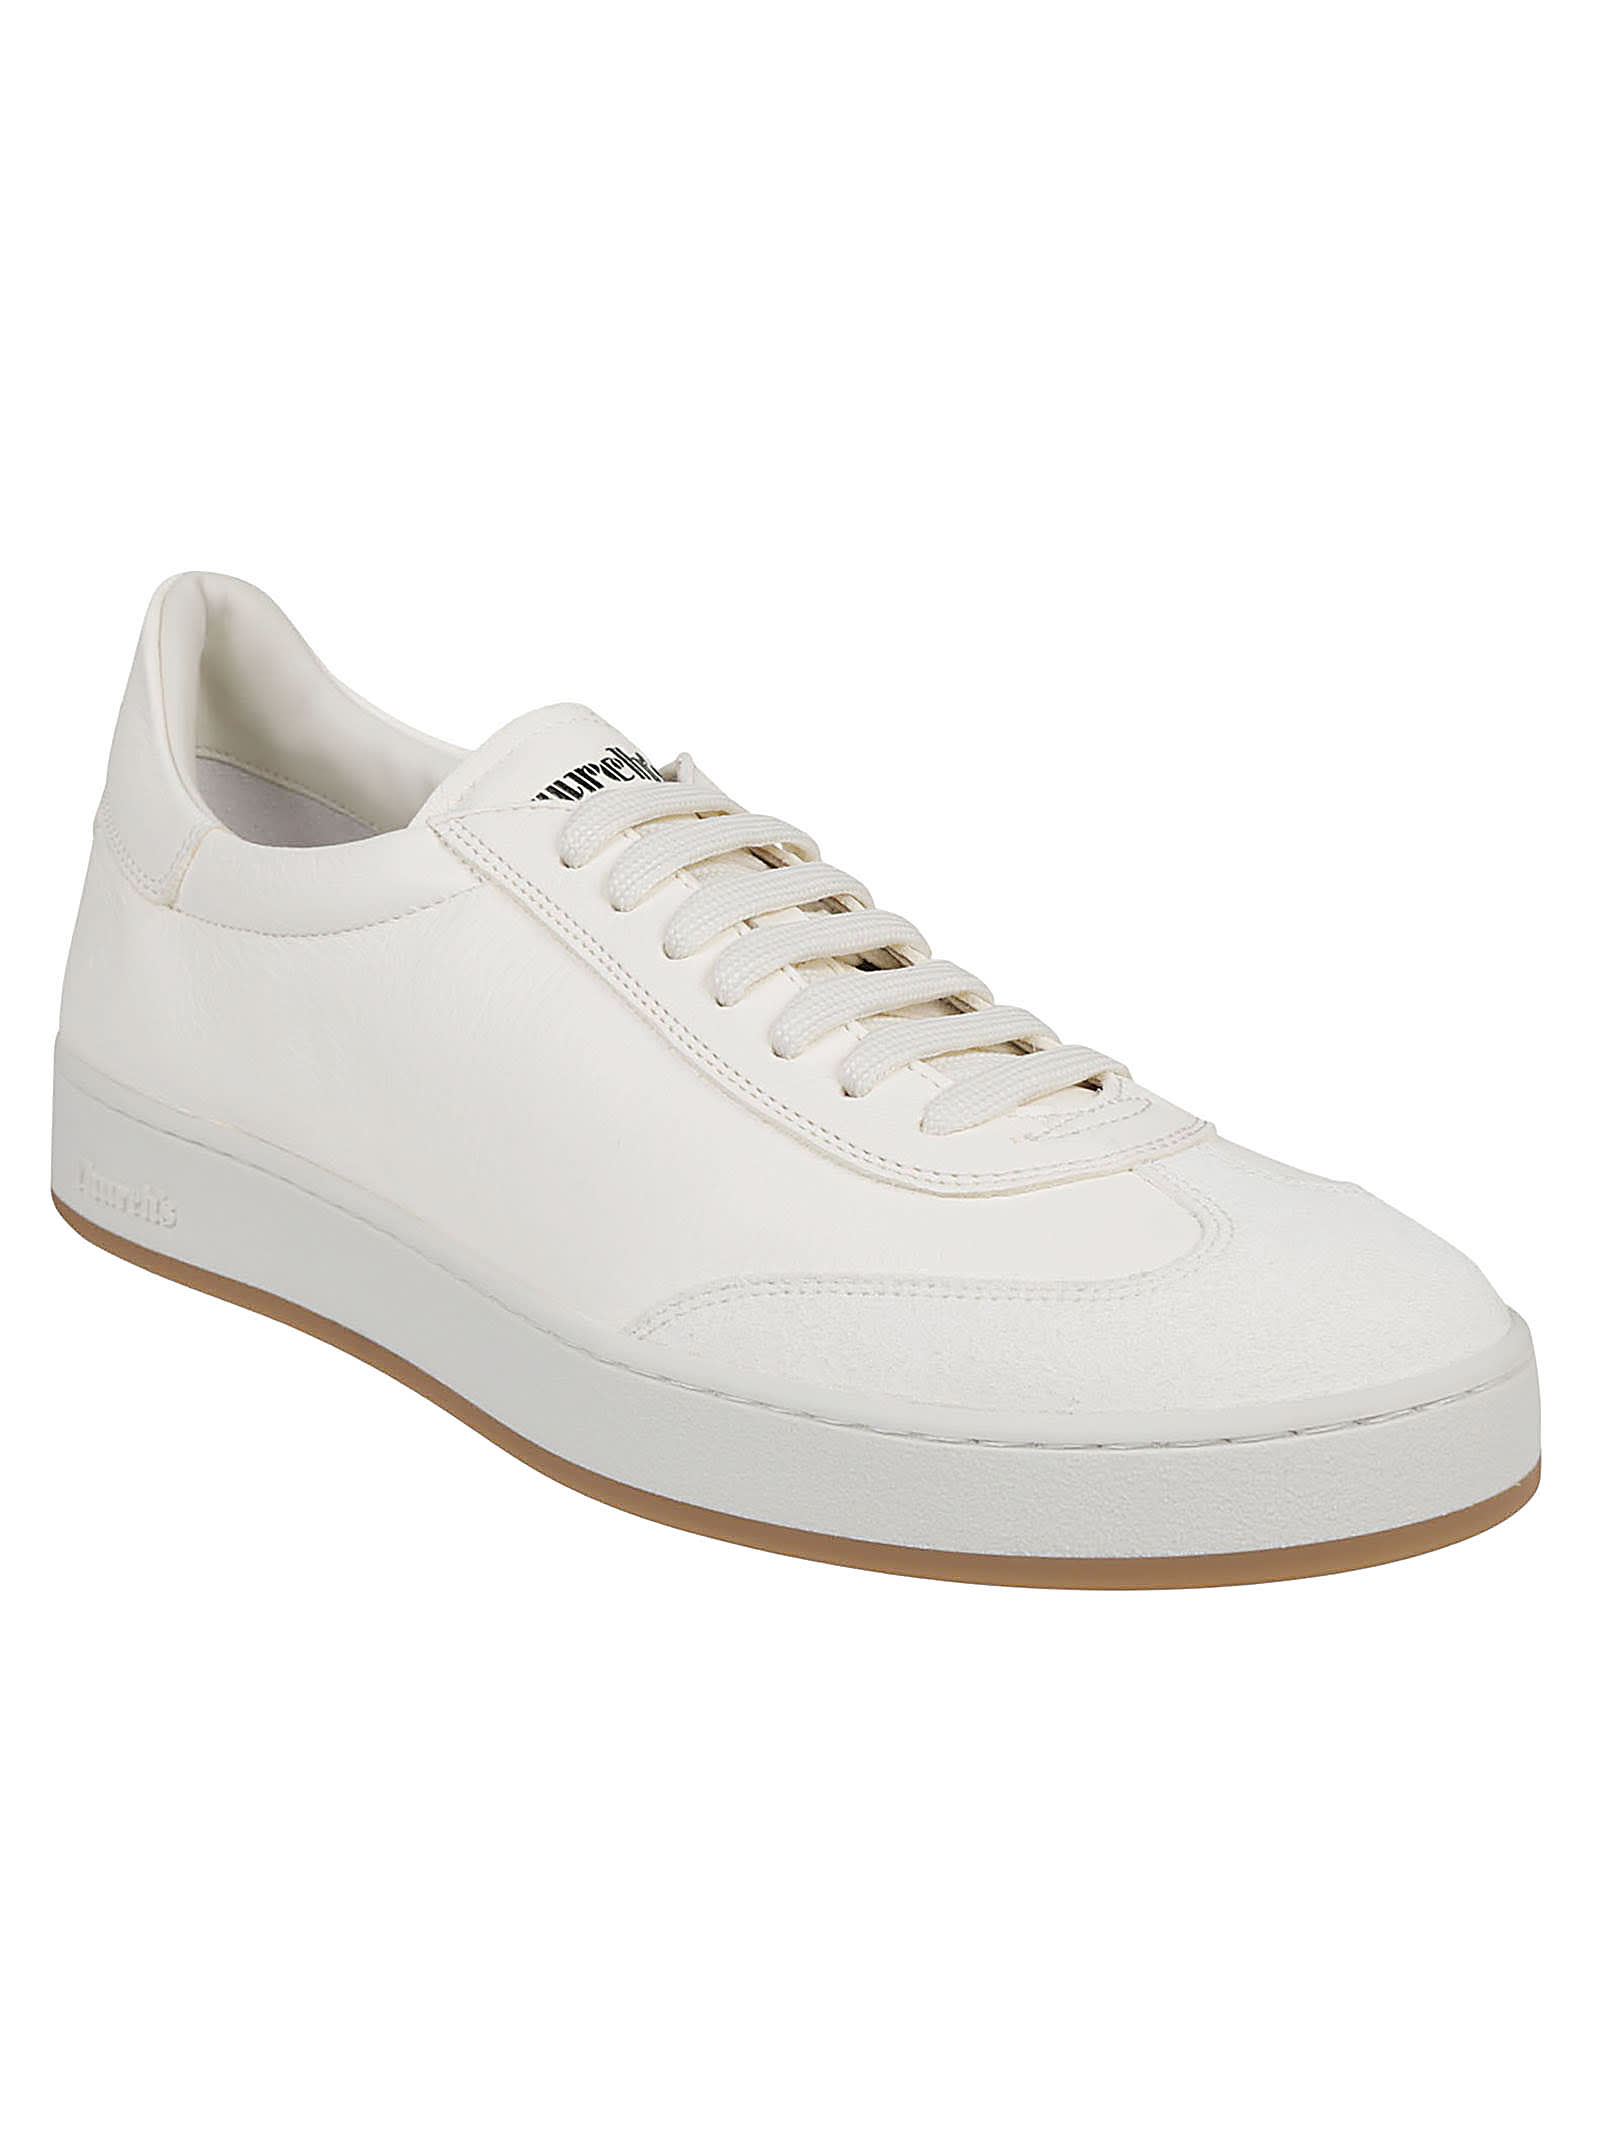 Shop Church's Largs Low Top Sneakers In All Ivory